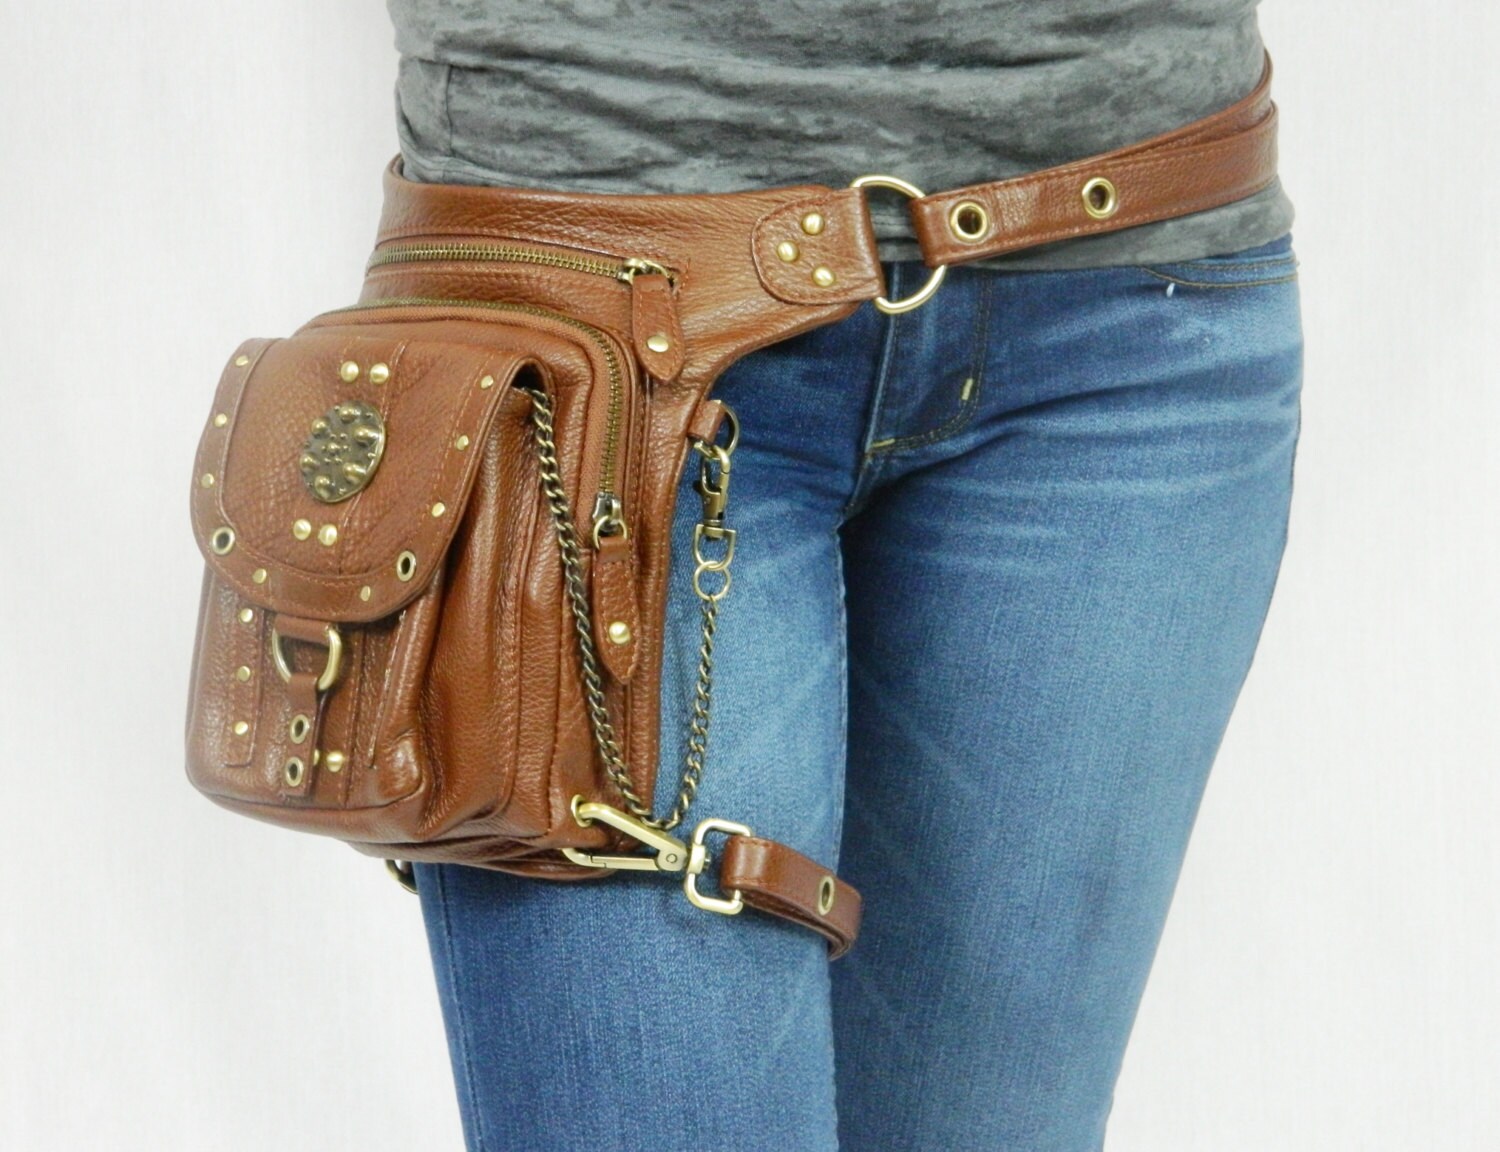 Boho Pack Brown Thigh Holster Protected Purse Shoulder